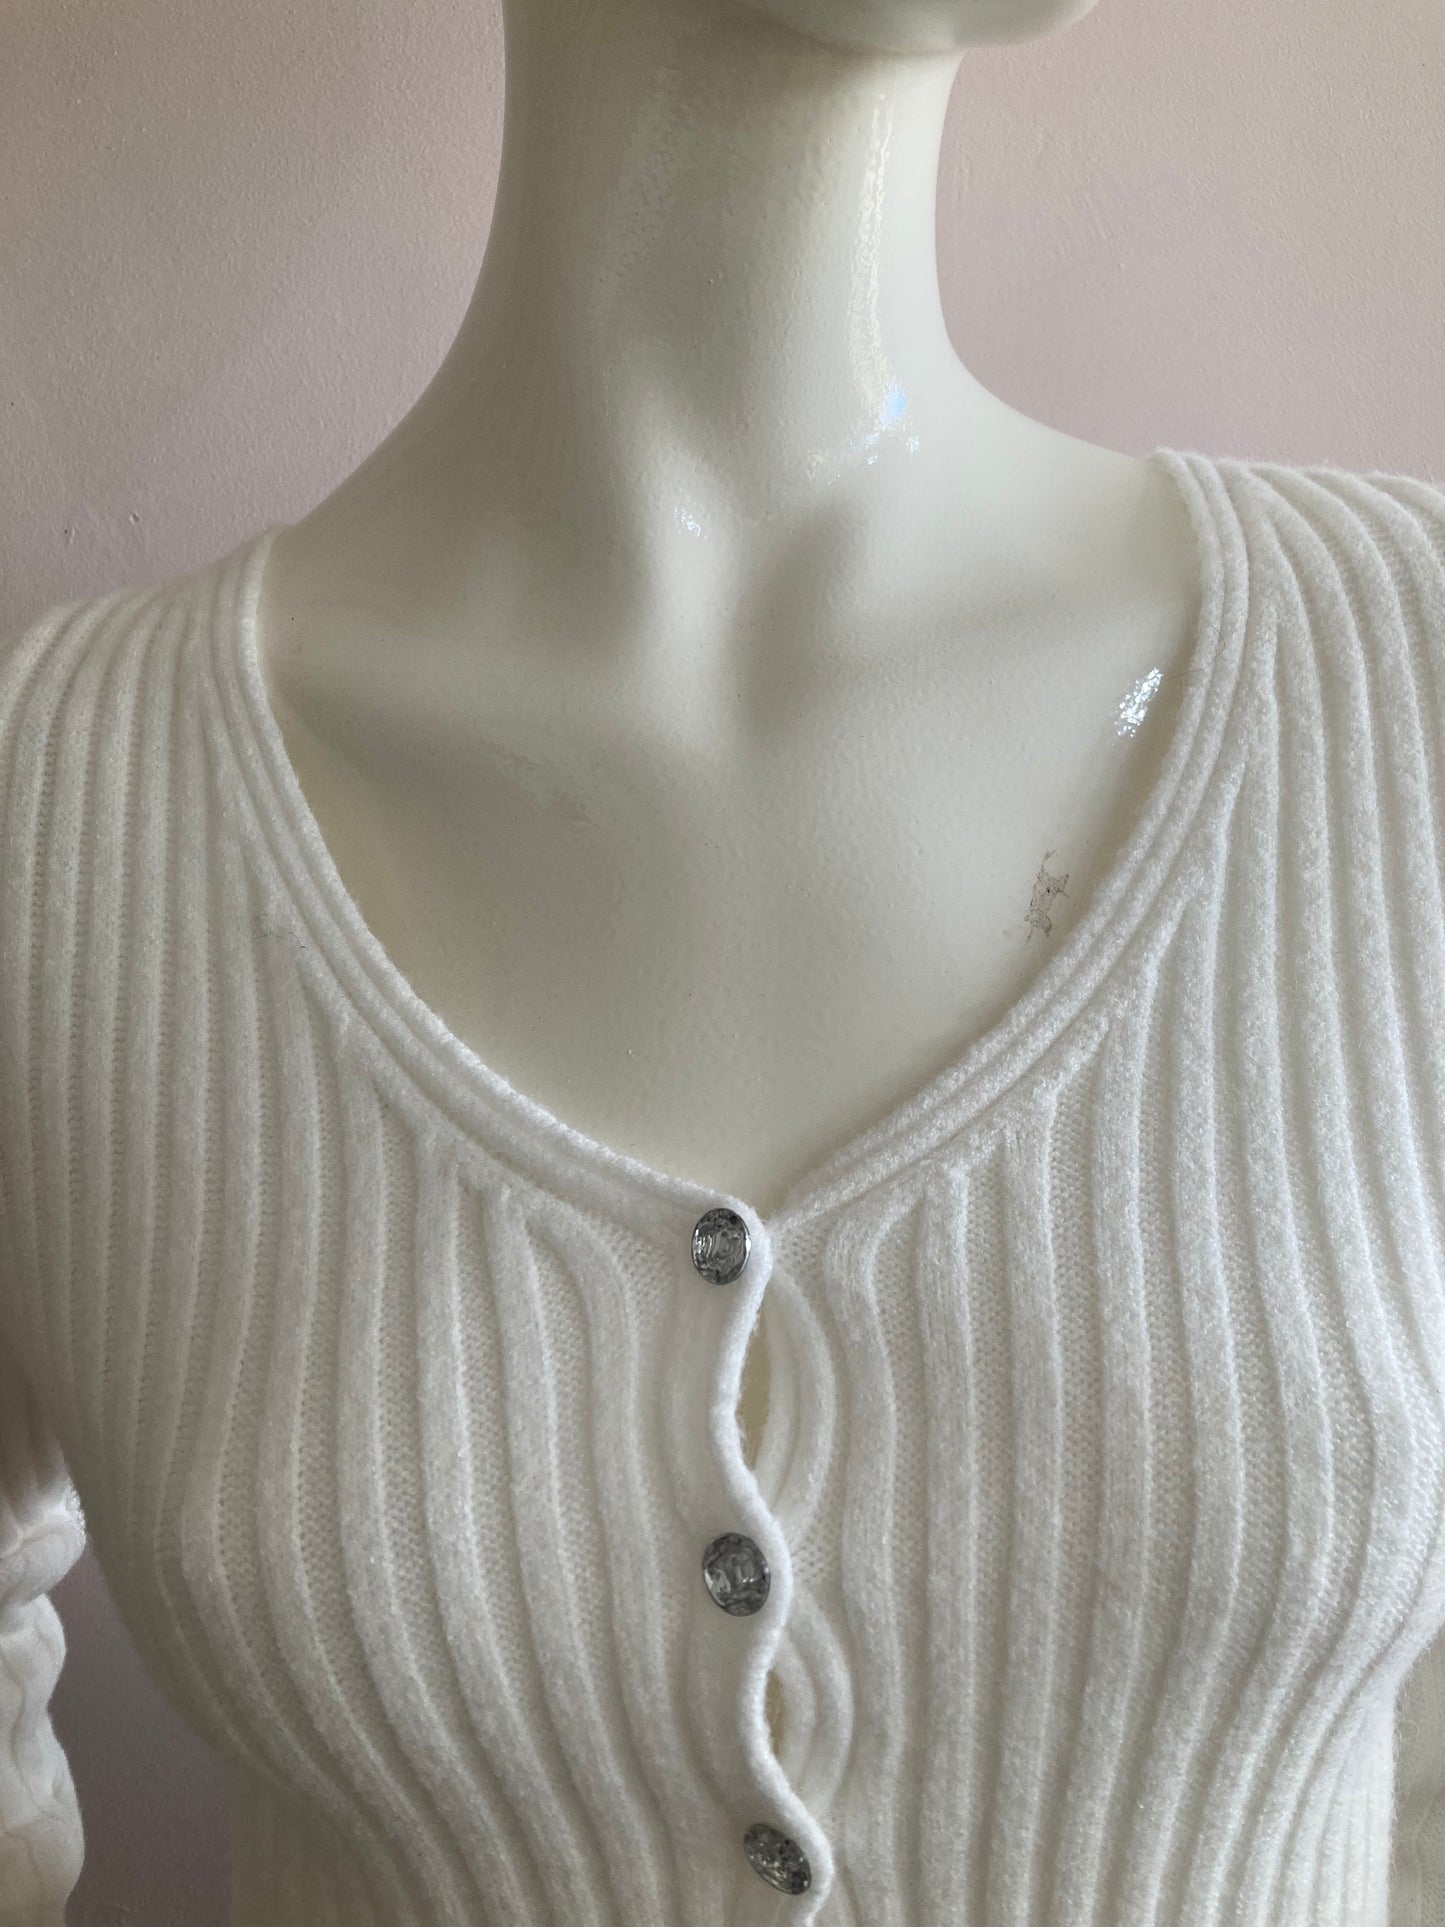 Nice short ribbed white cardigan with shiny buttons